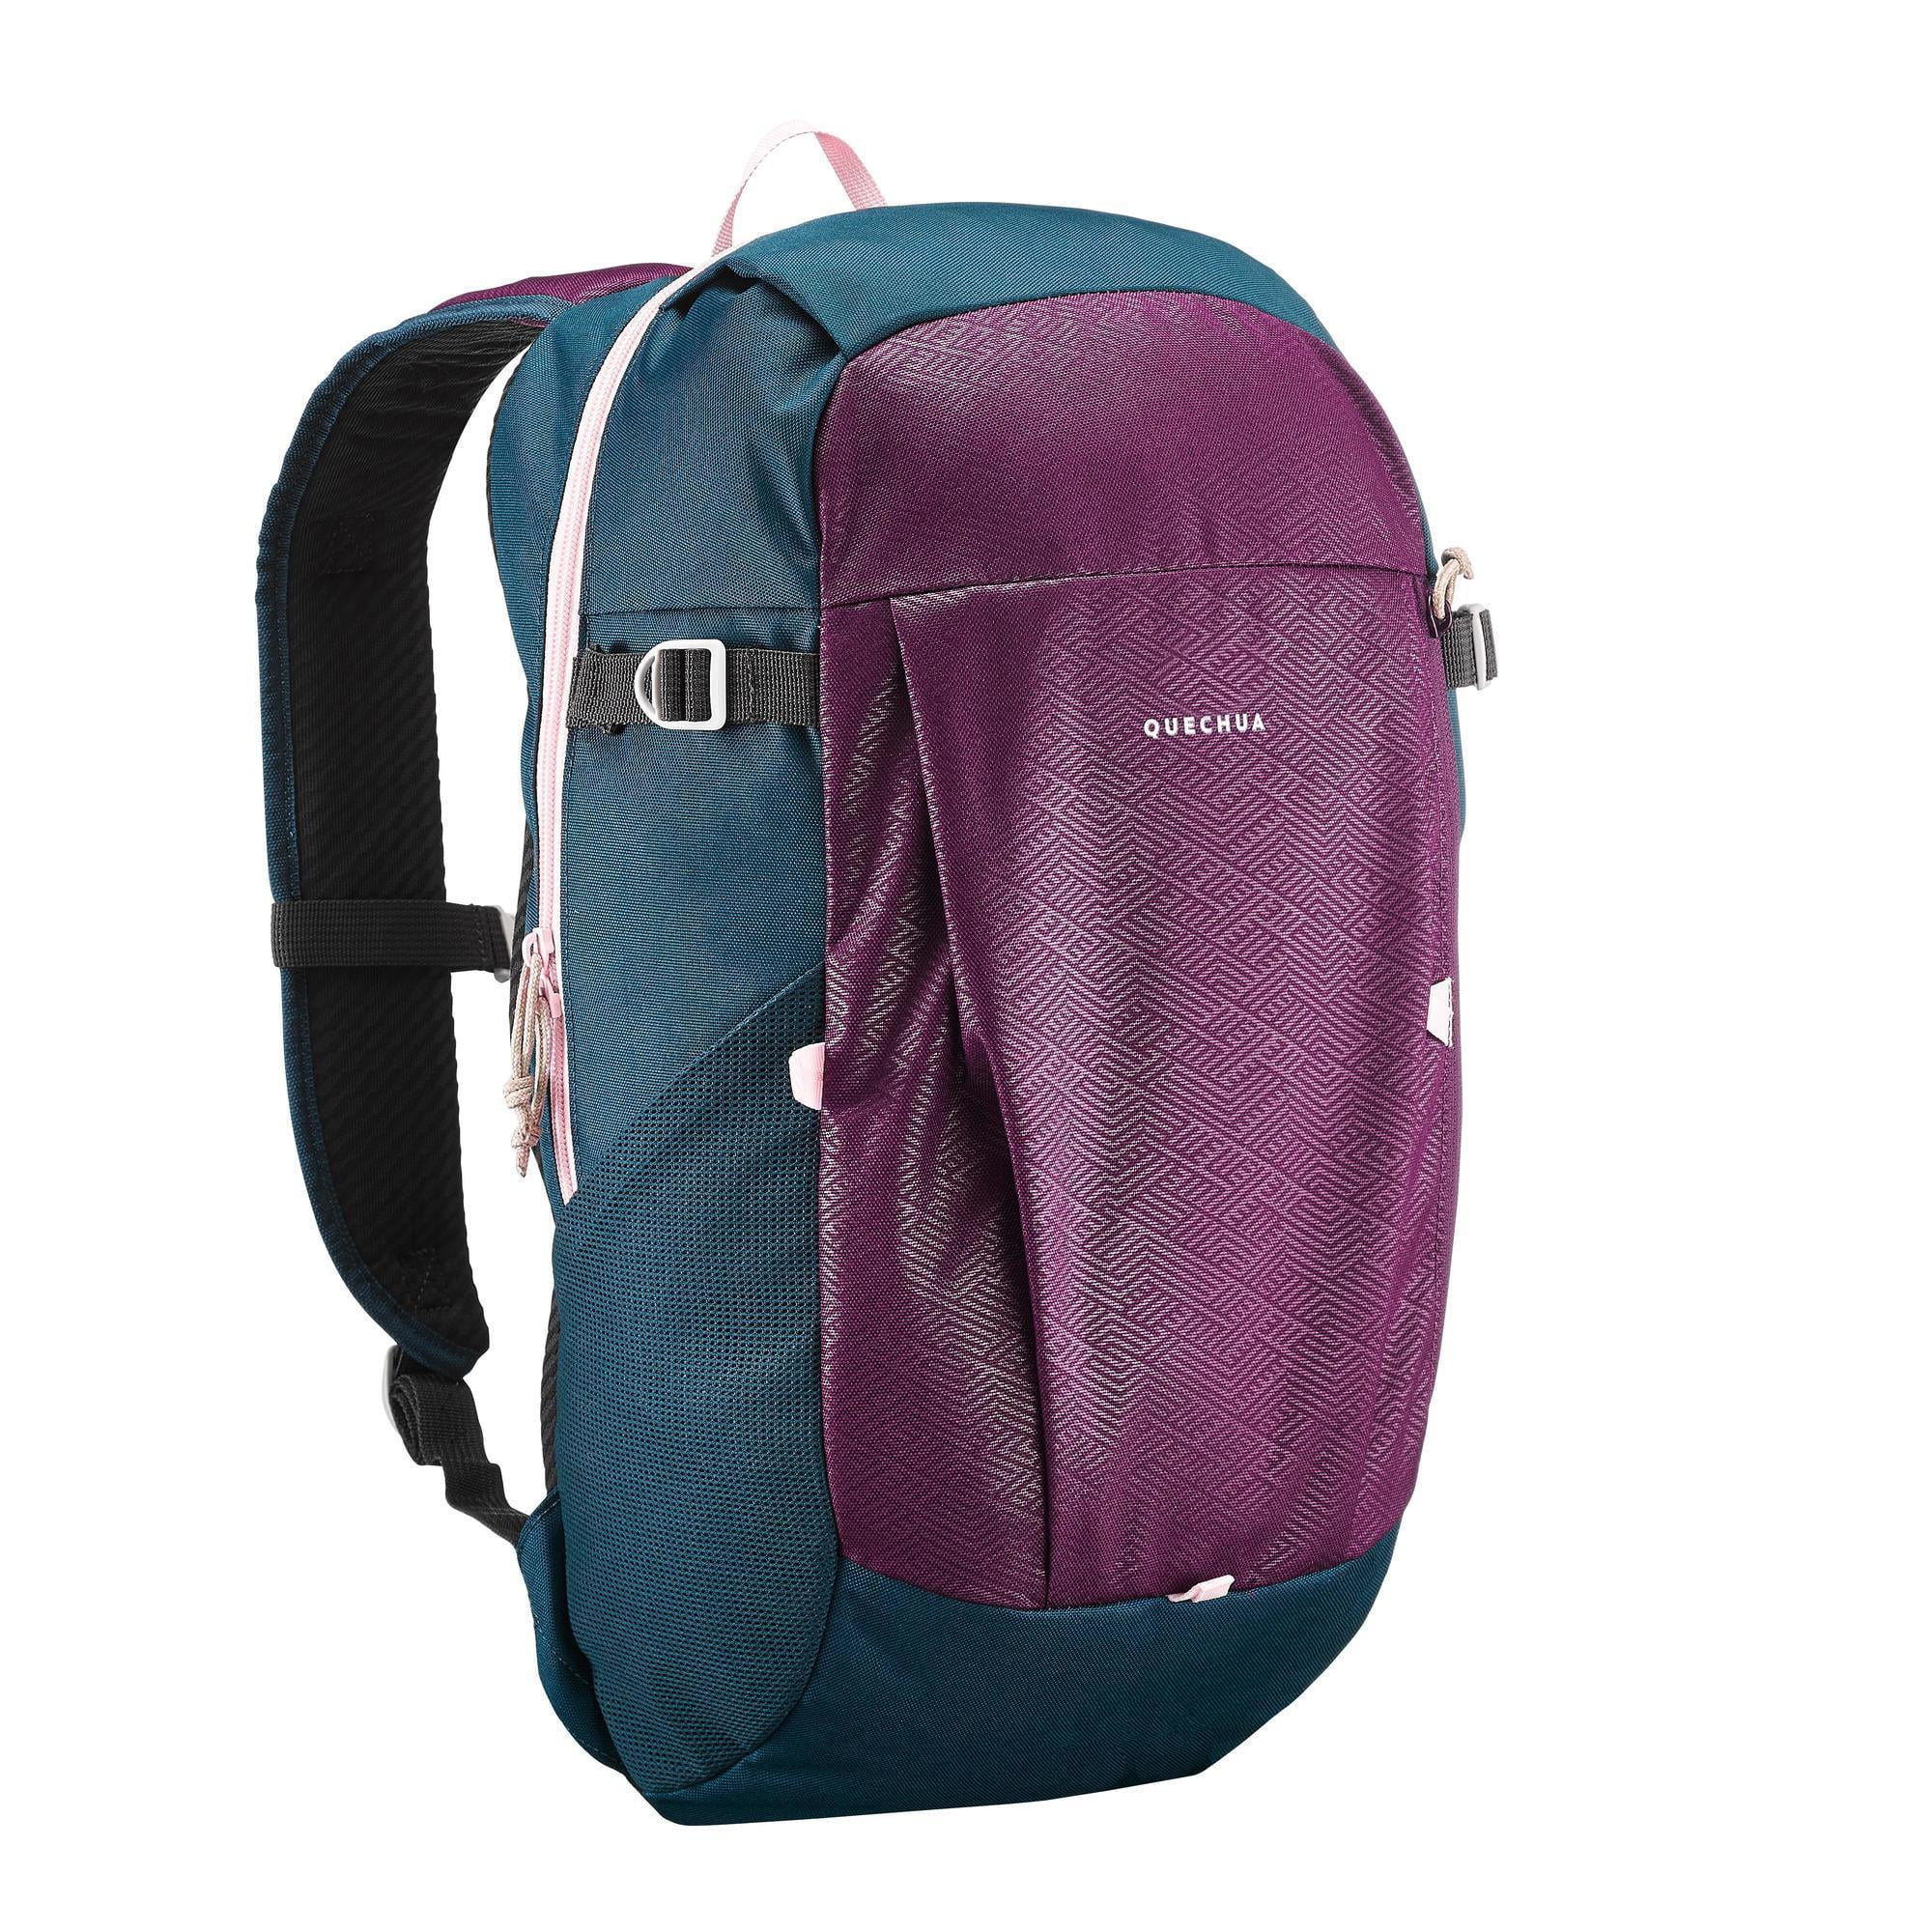 Quechua Arpenaz 10 Backpack | Aster Vender Bags